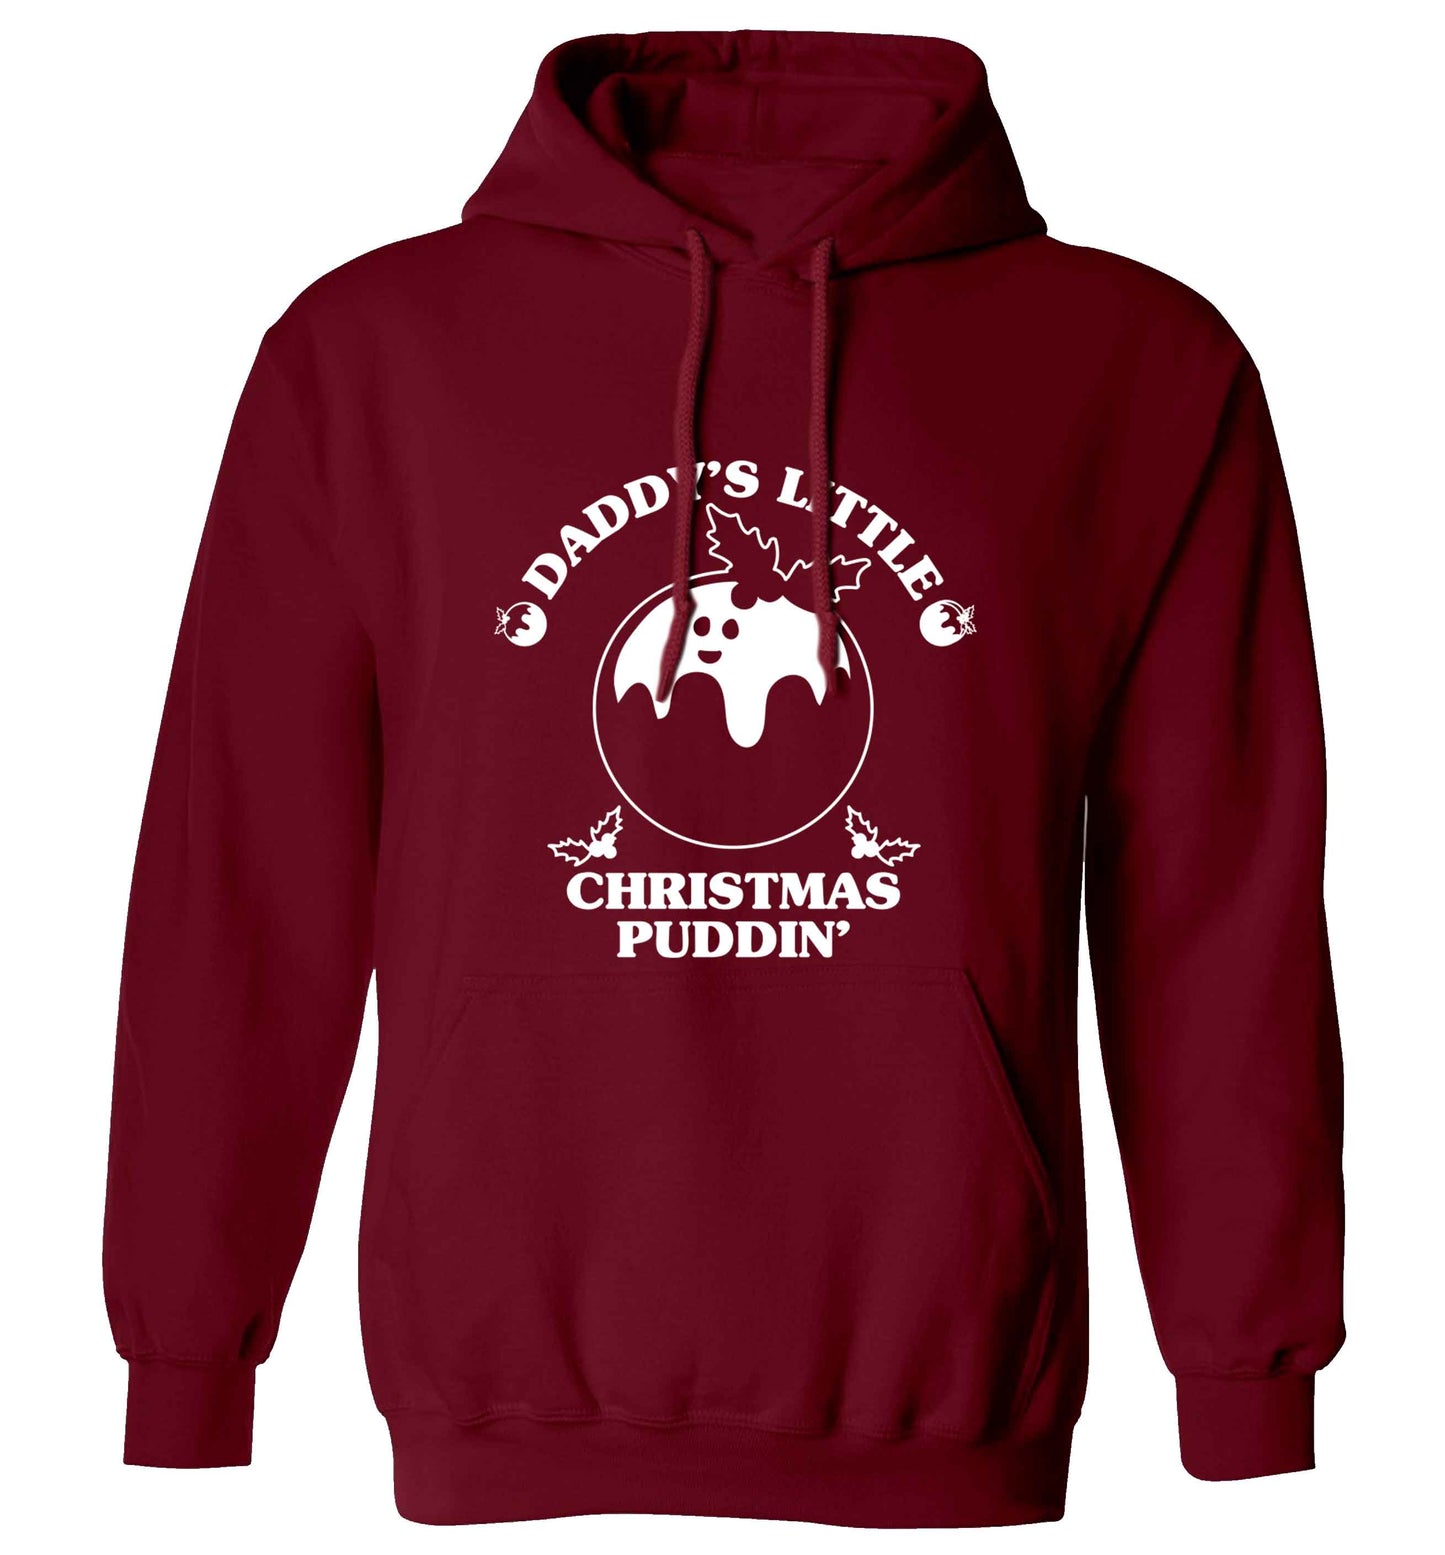 Daddy's little Christmas puddin' adults unisex maroon hoodie 2XL